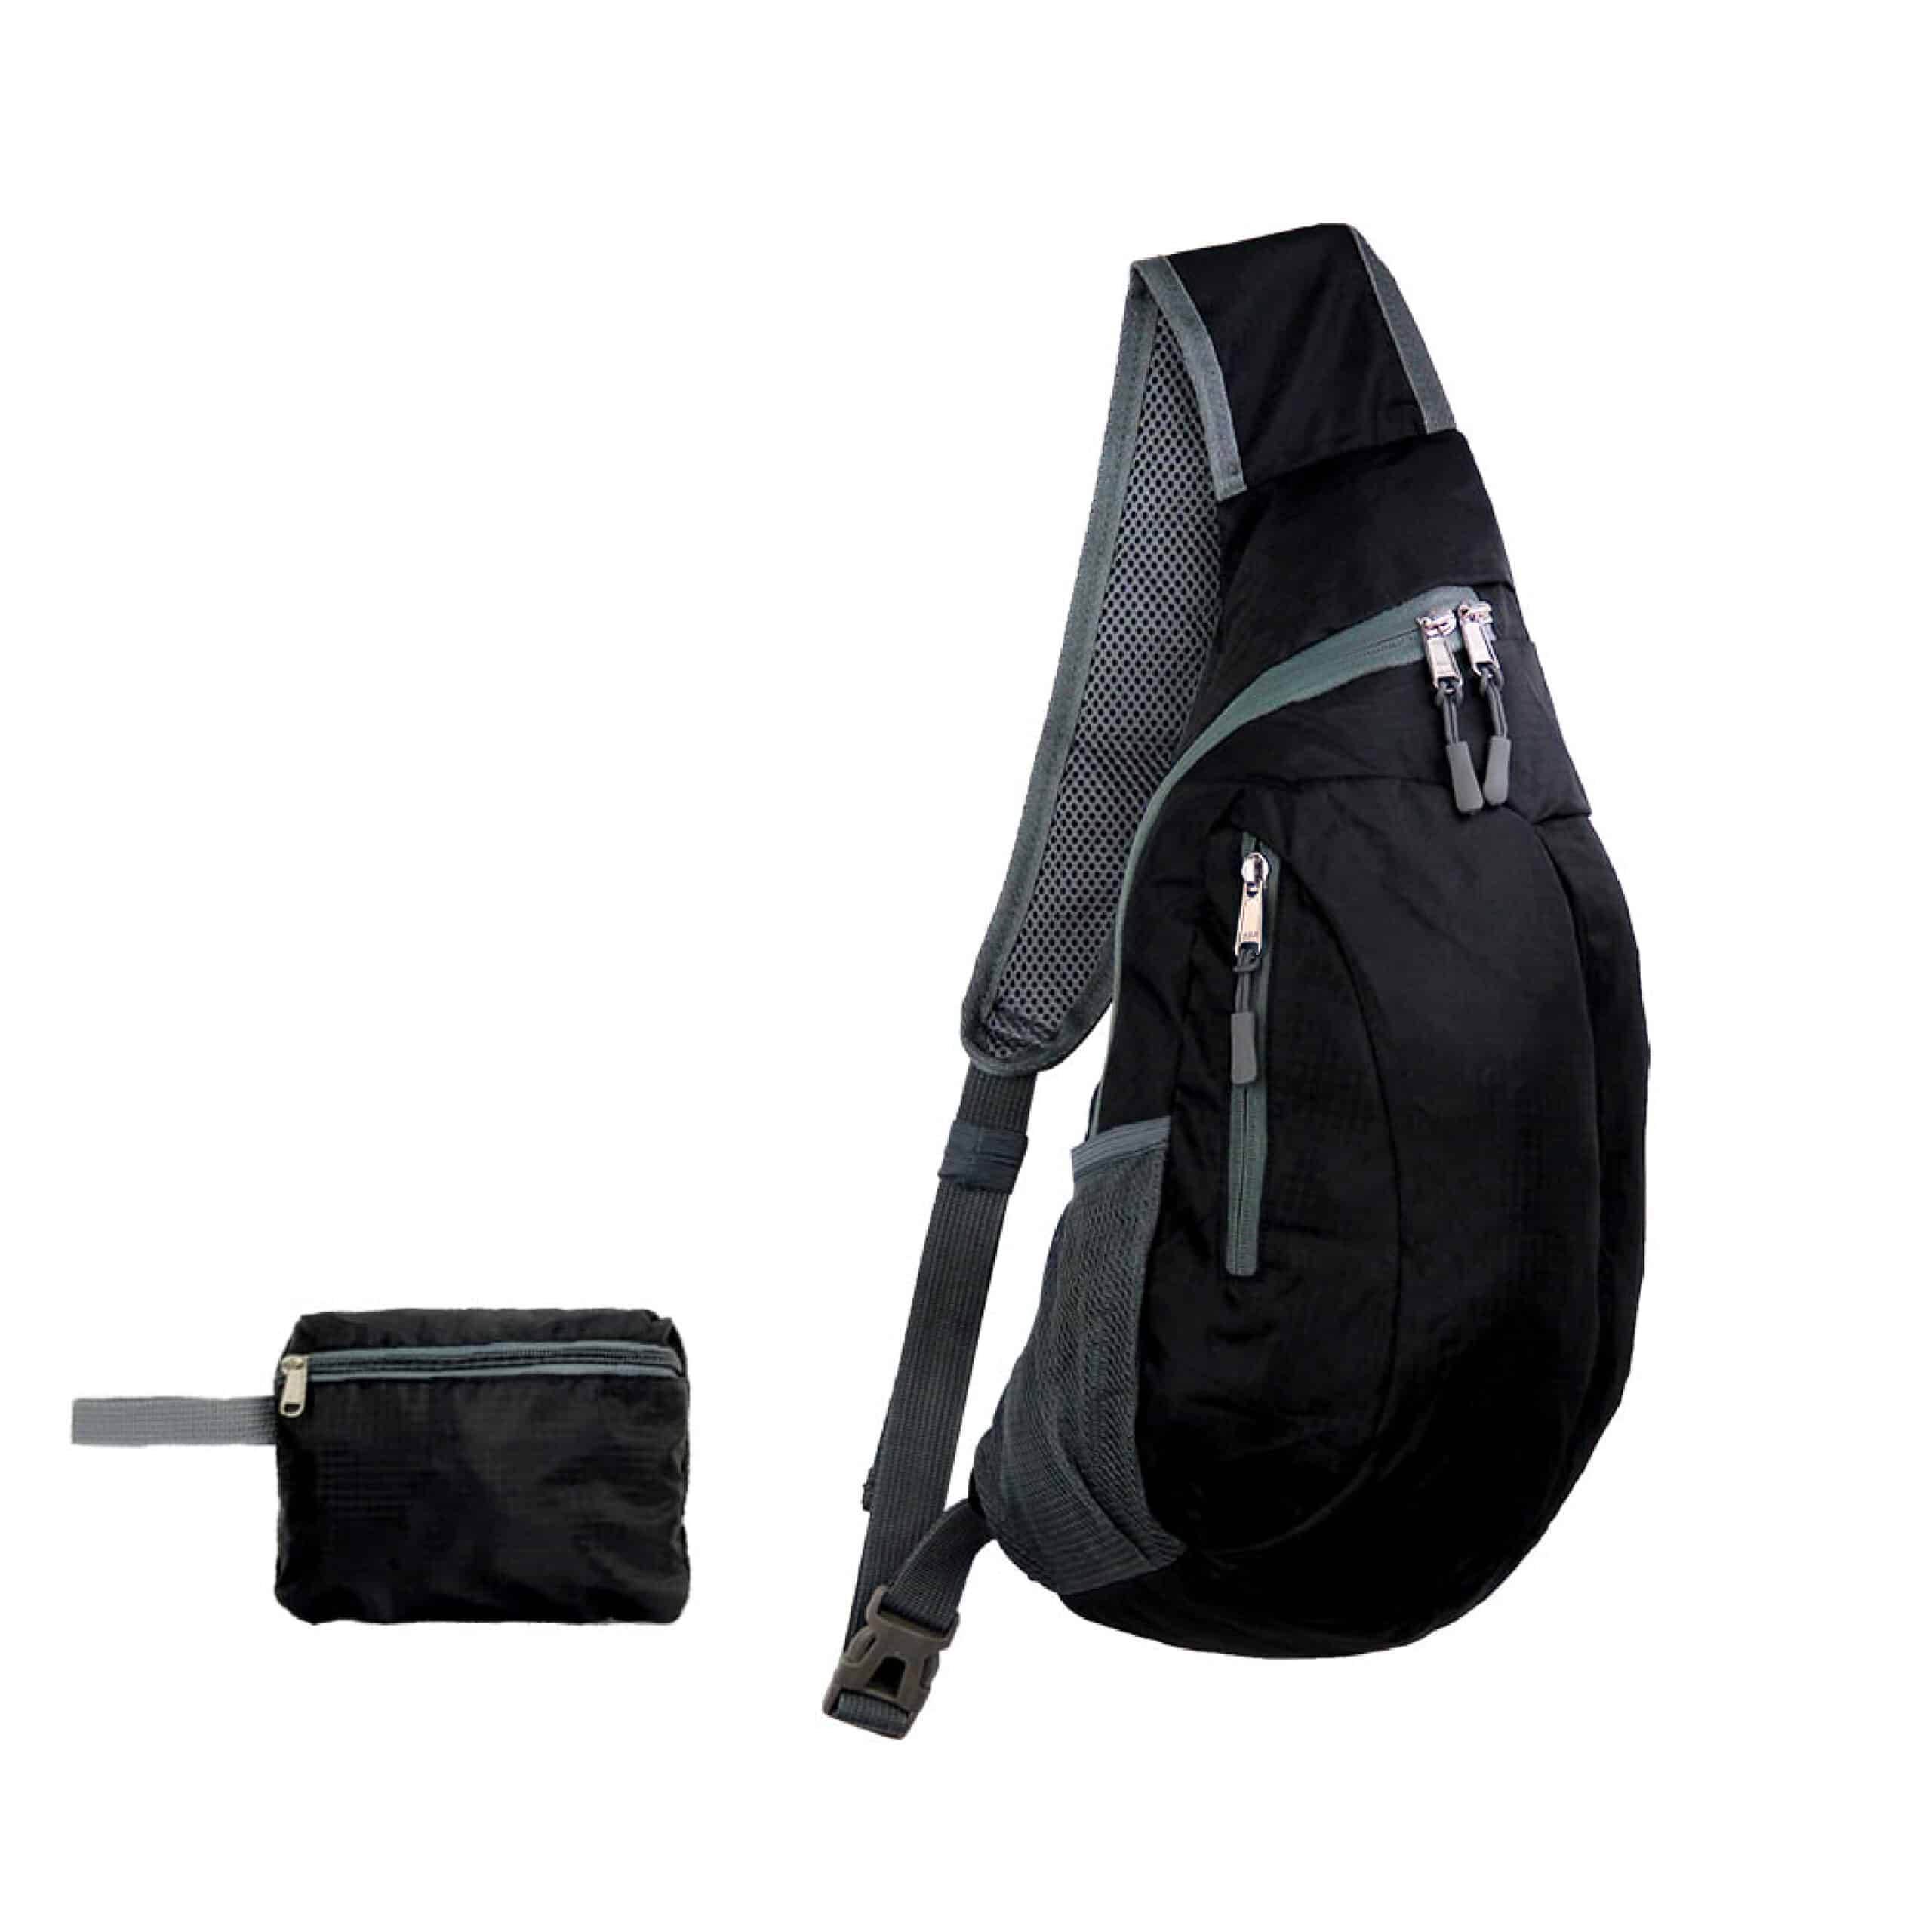 Sling Bag Supplier by SJ-World Gifts Malaysia Trusted Corporate Gift Supplier